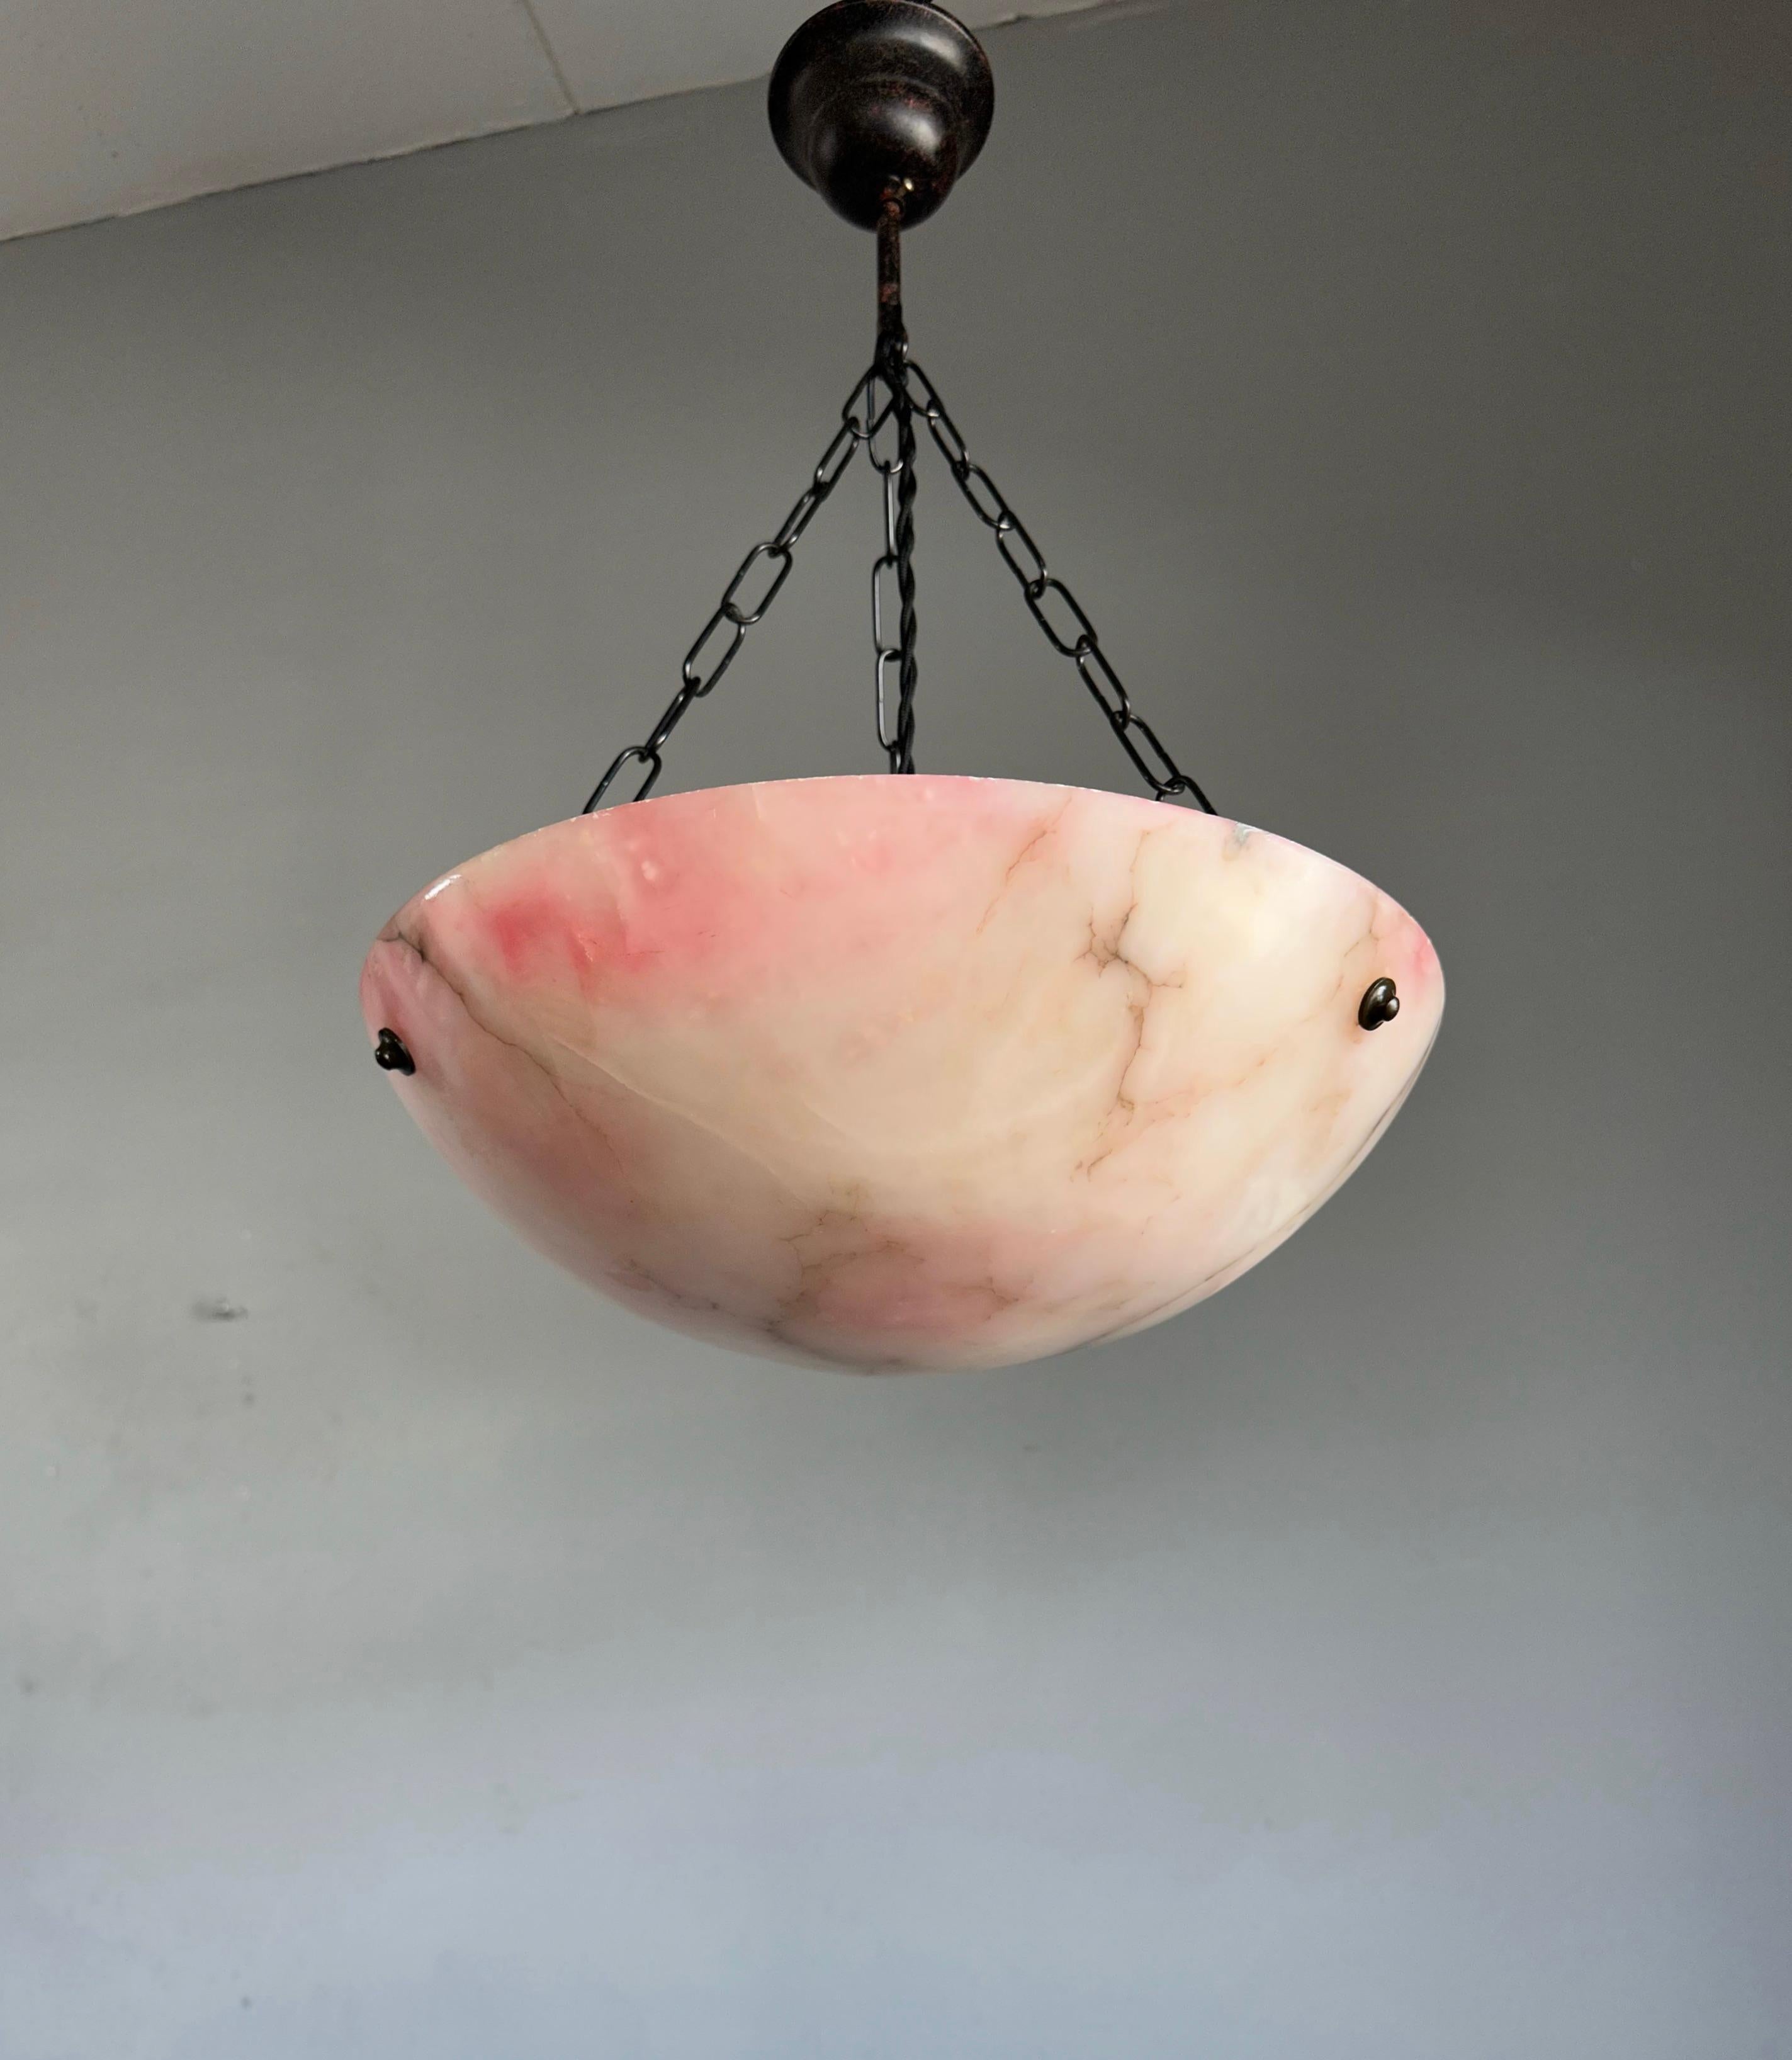 Unique 1920s white alabaster and black veins pendant with a shade of pink.

One of the qualities of alabaster pendants is that no two shades will ever be exactly the same. Mother nature created the mineral stone alabaster over the course of many